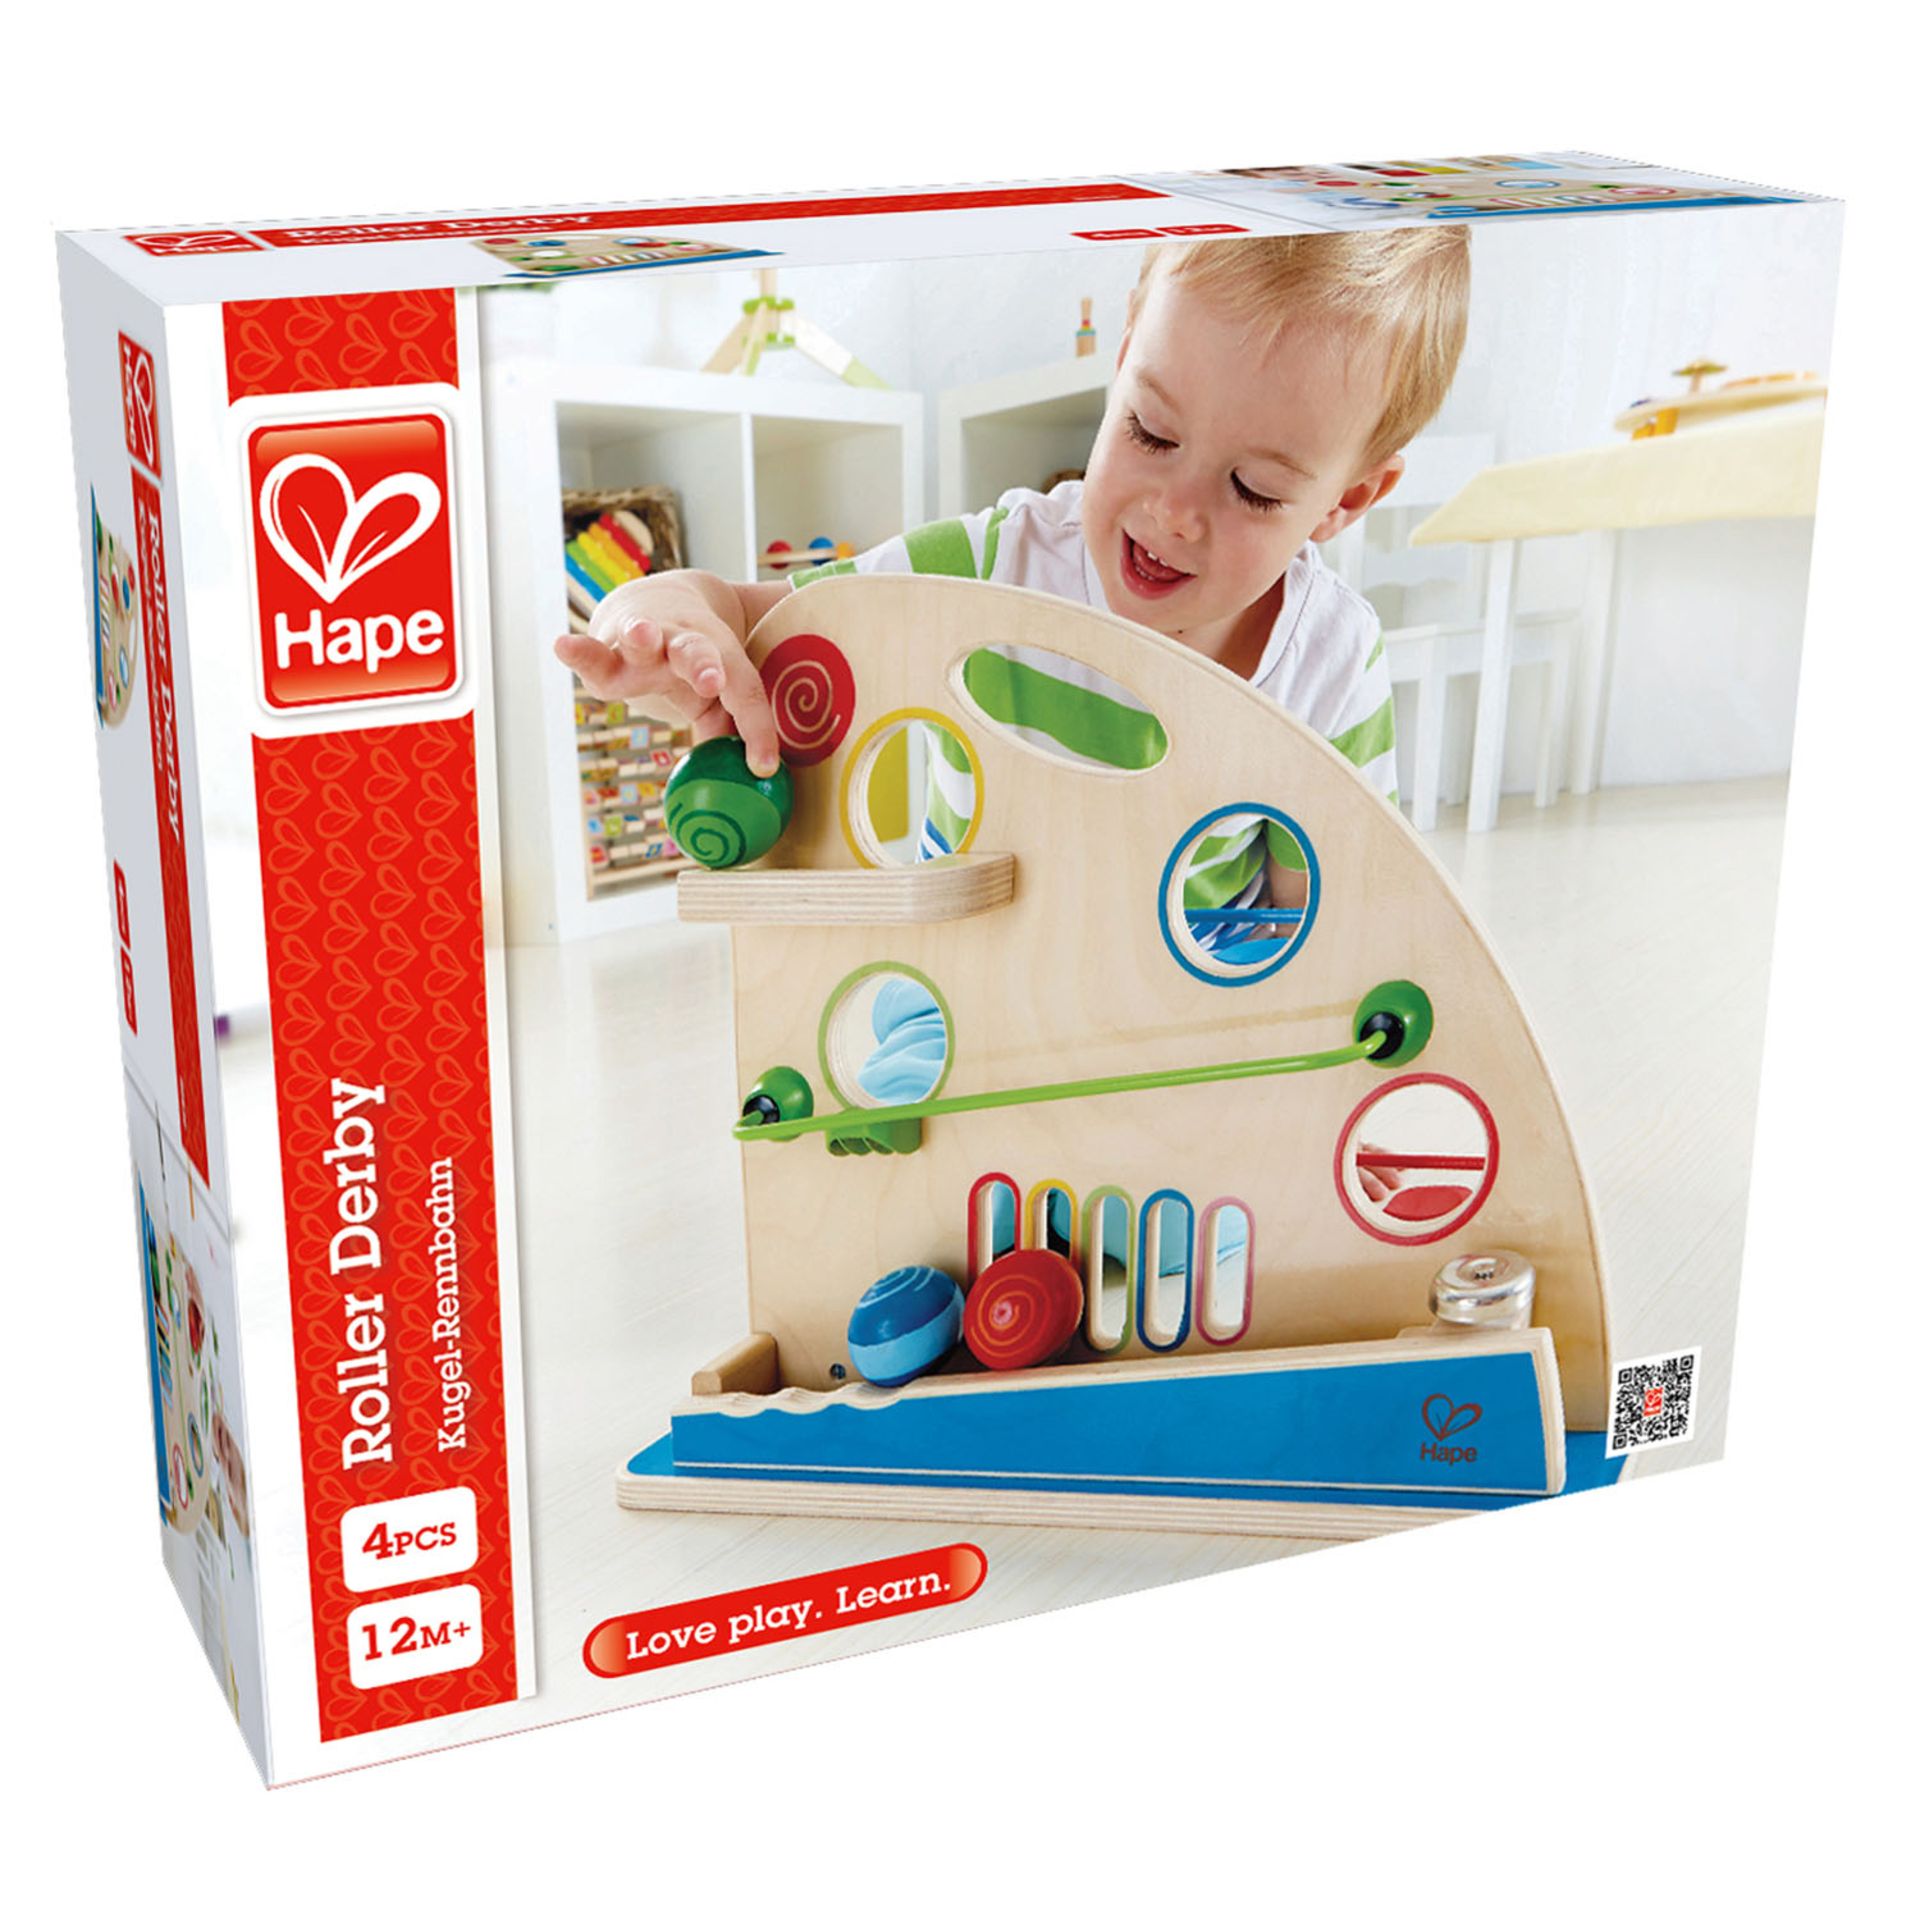 162 x Family Games & Toys products as listed | RRP £ 1724.32 - Image 3 of 3